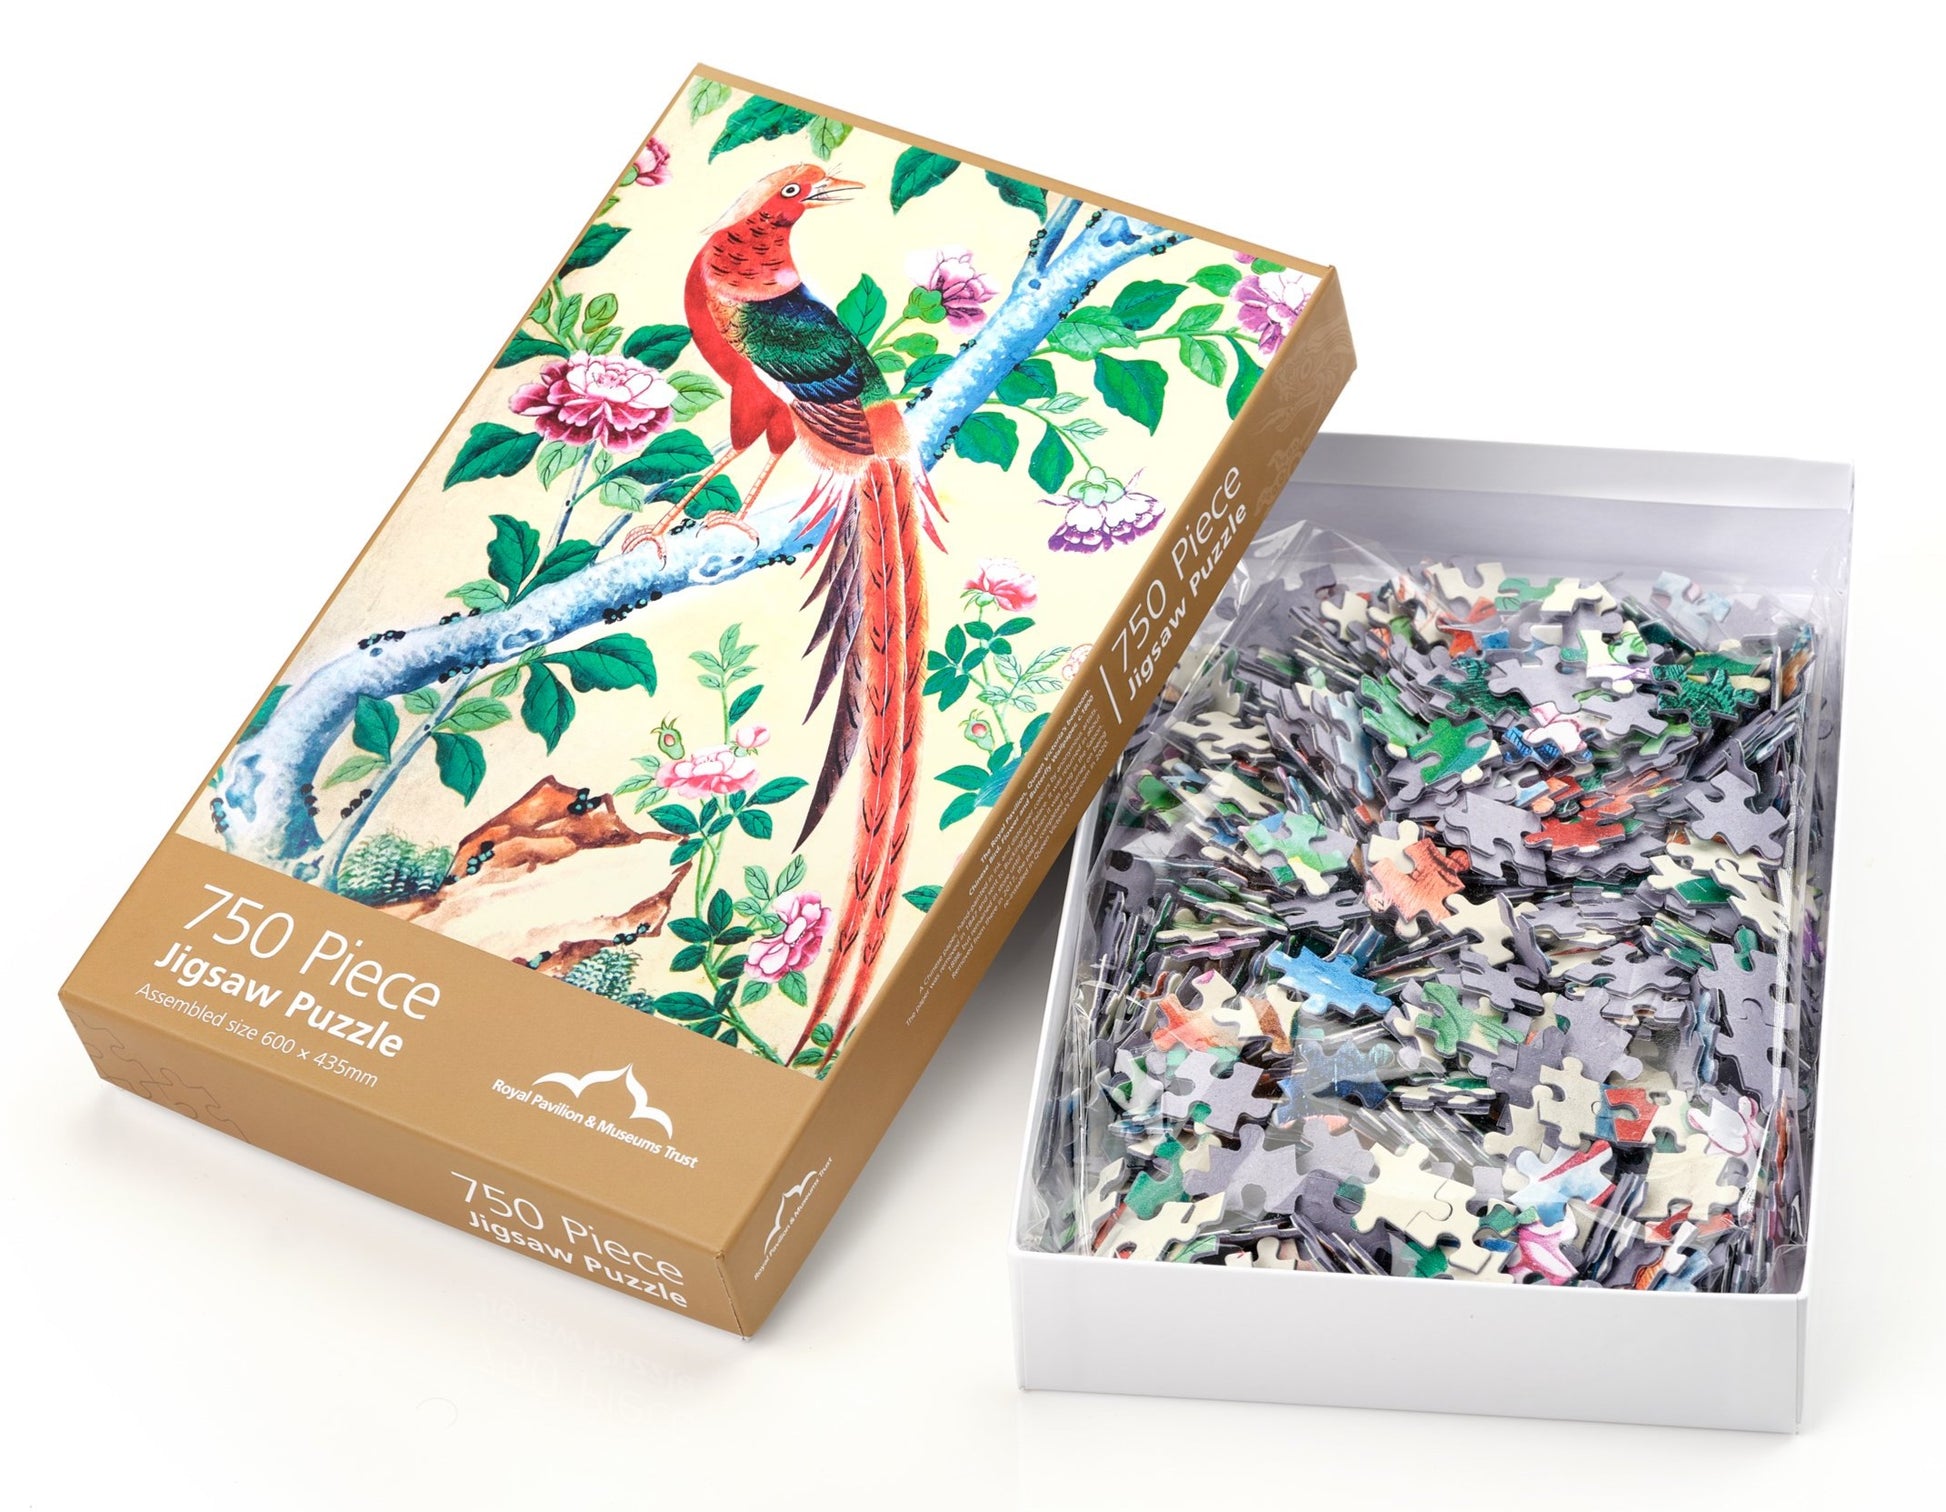 An opened box containing individual jigsaw pieces.